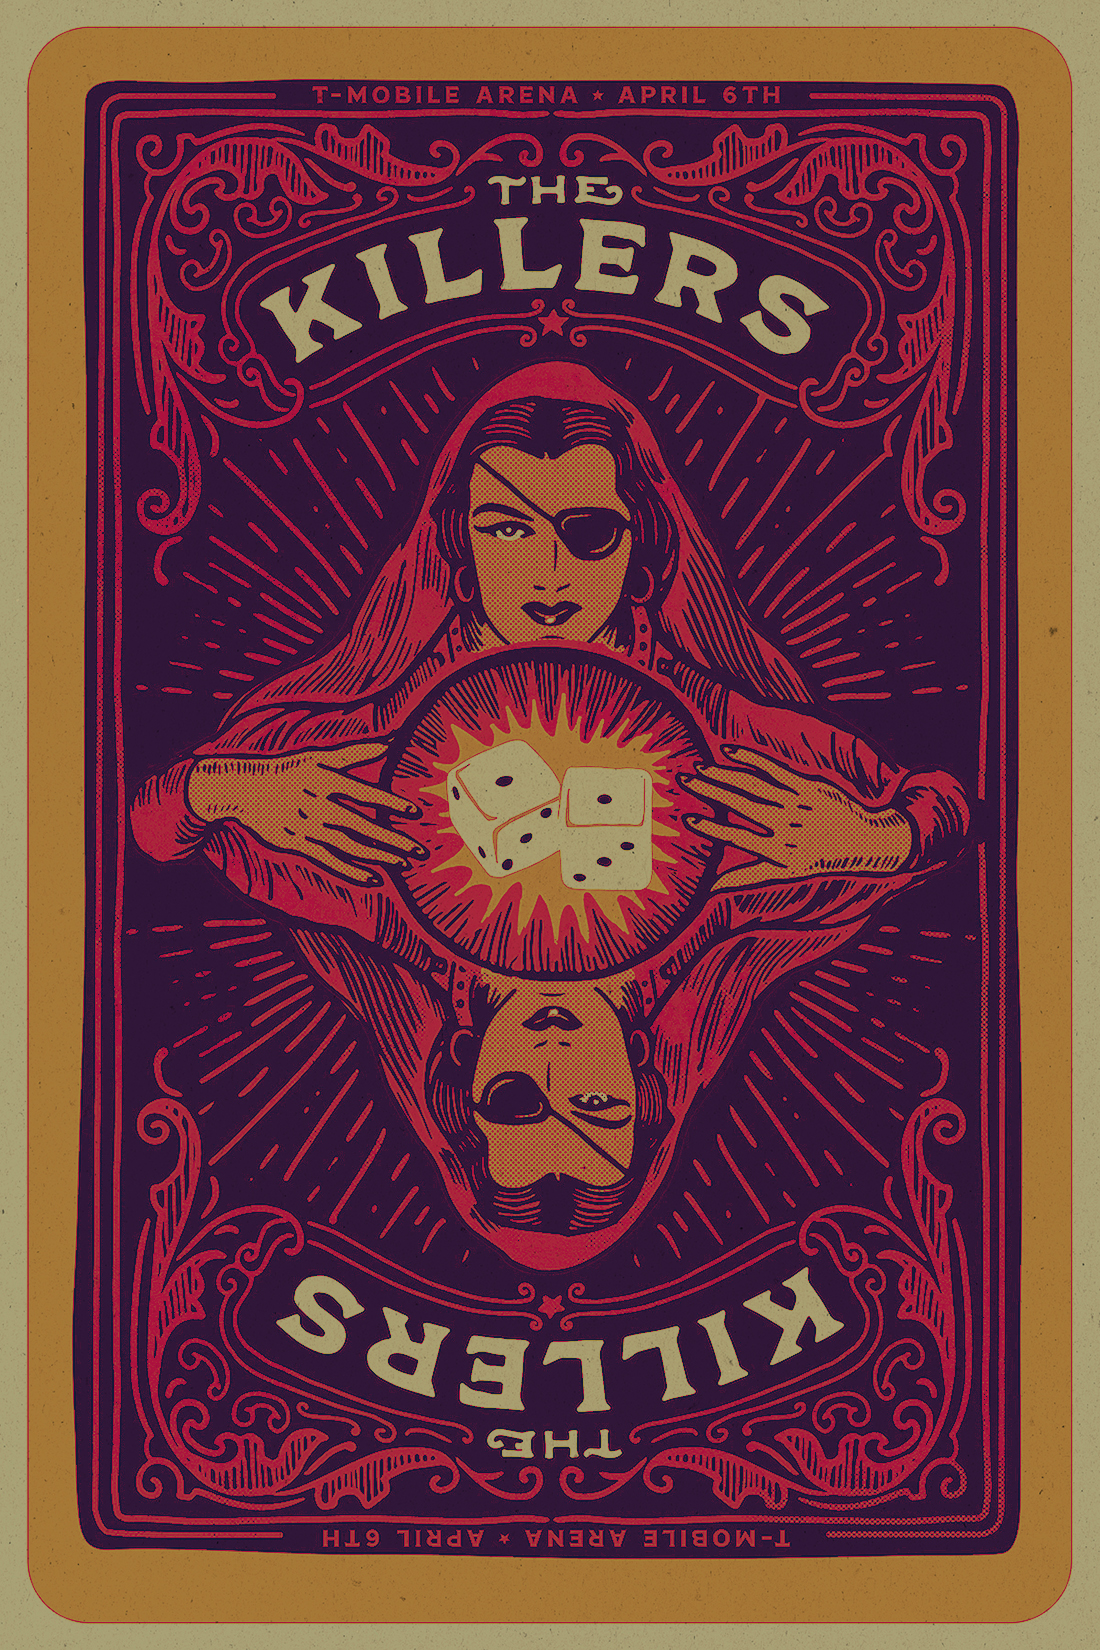 The Killers - Gig poster